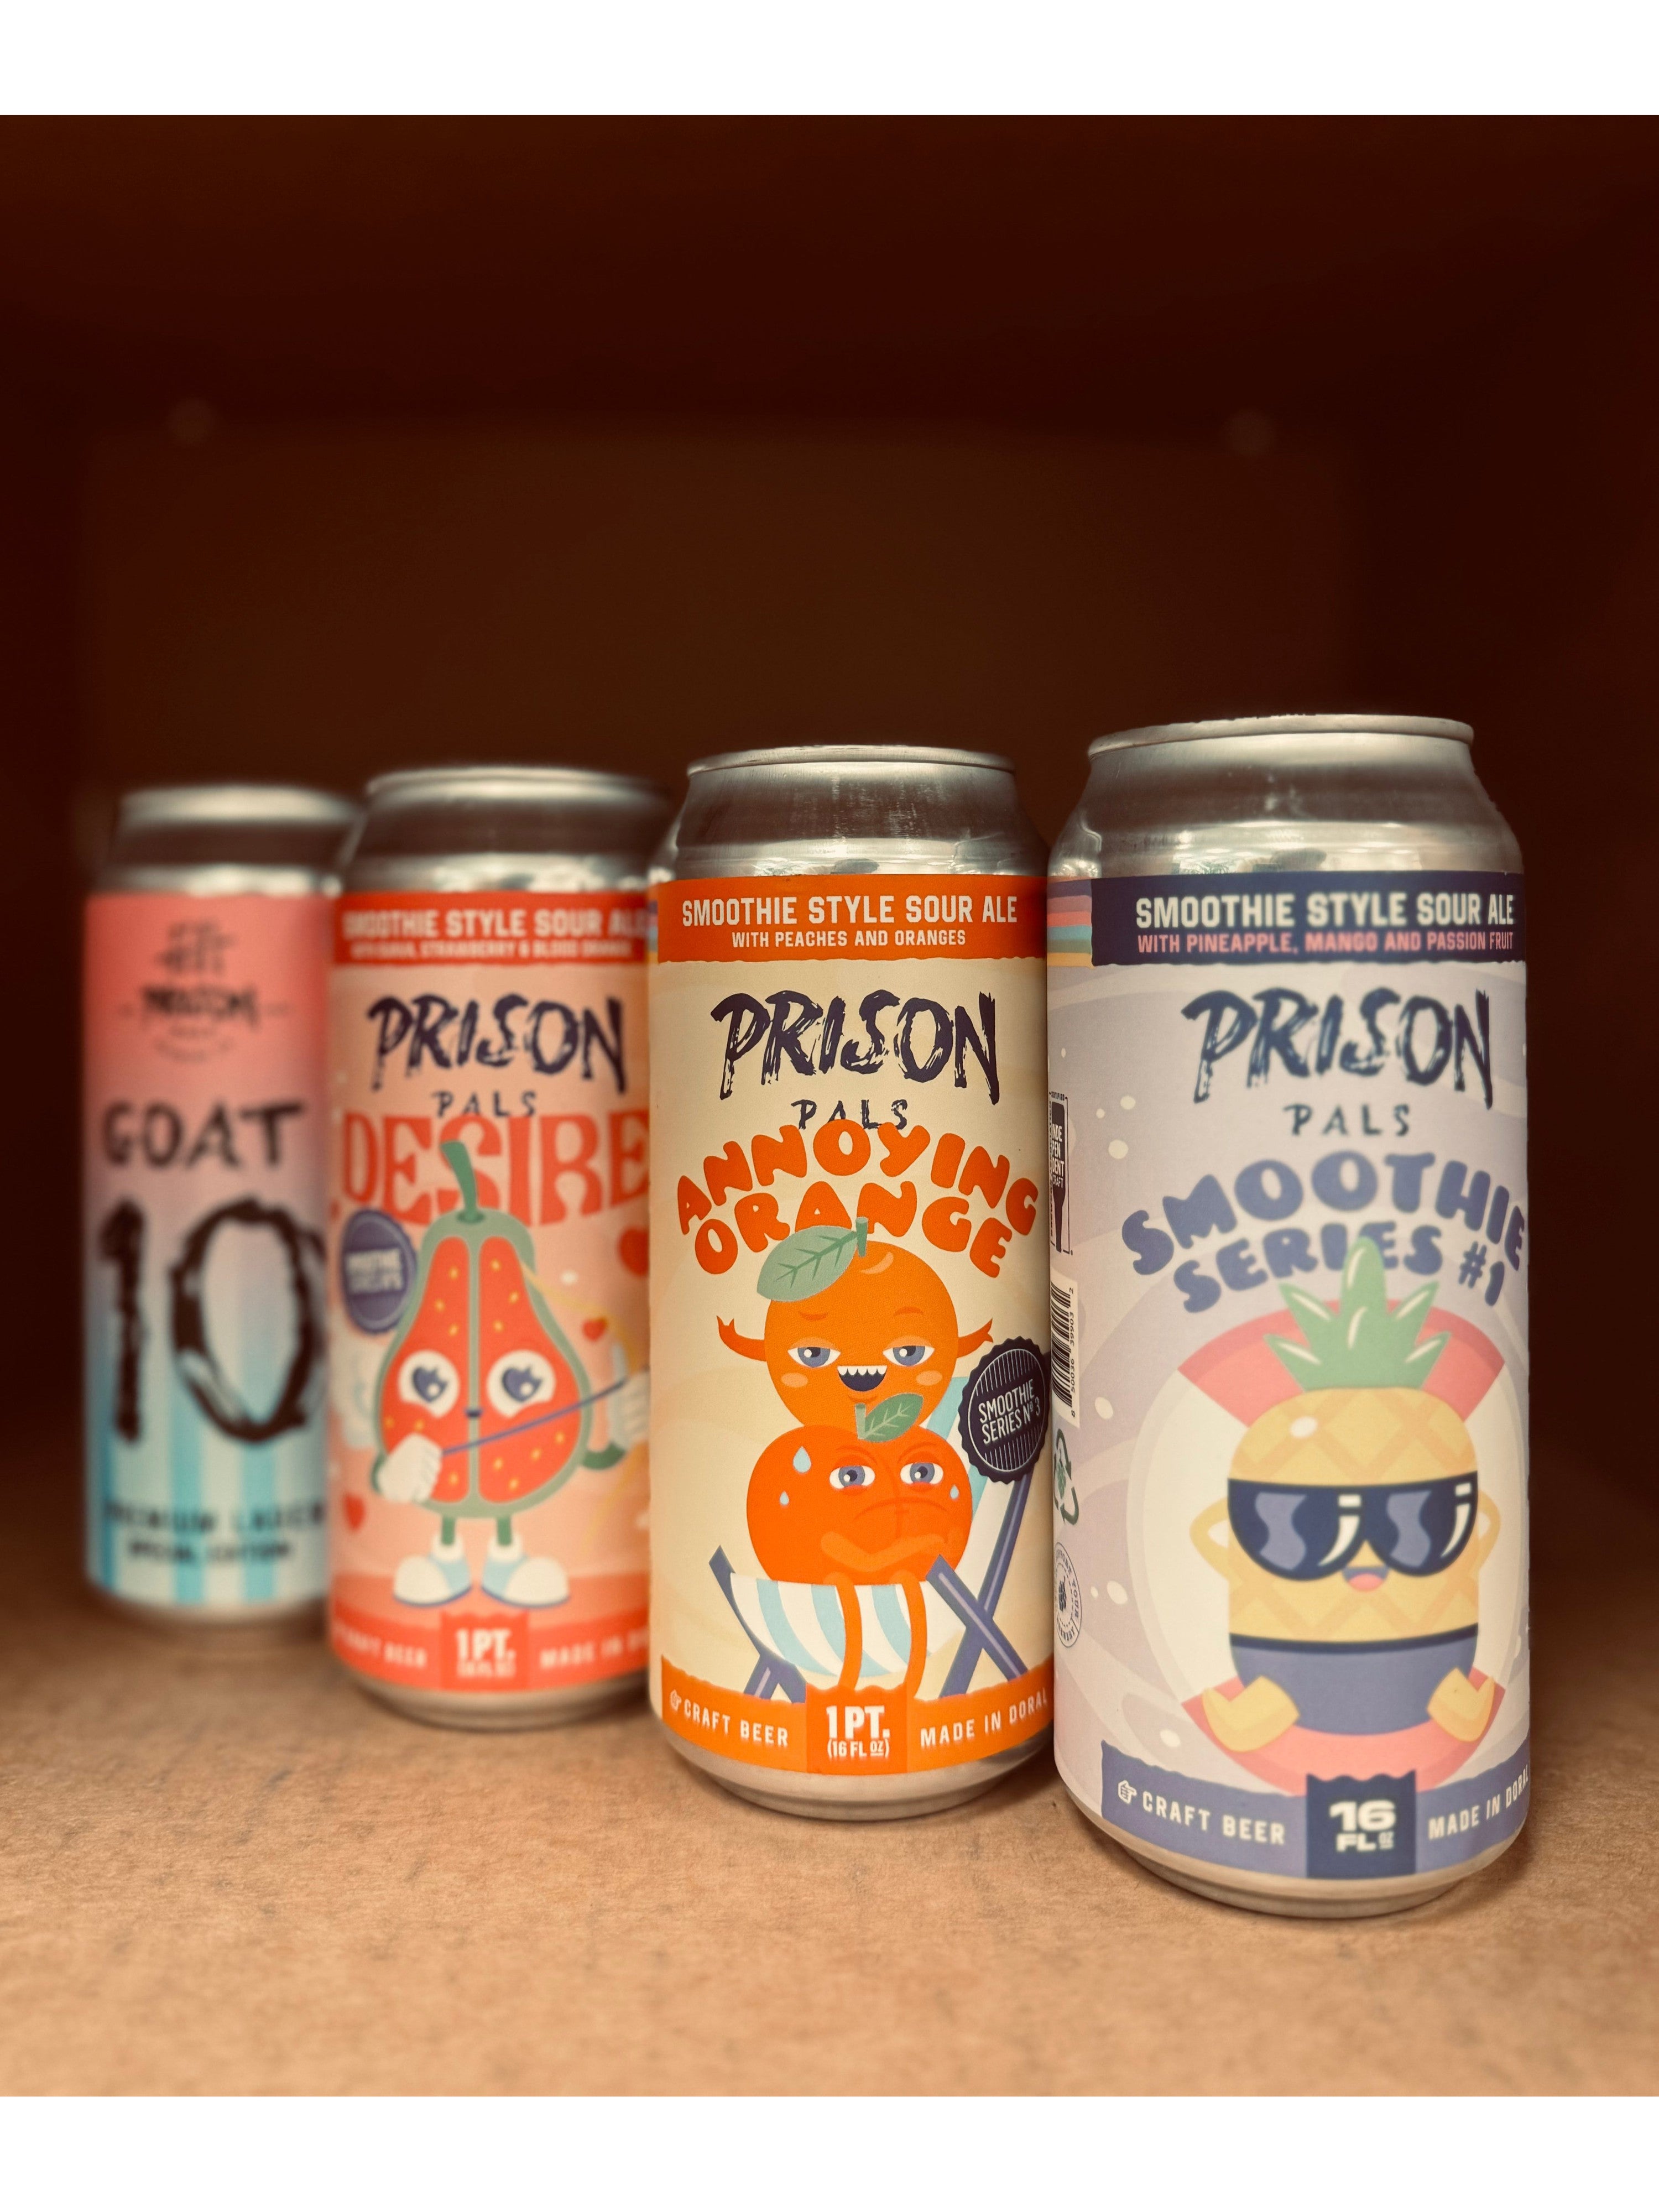 -Prison Pals- Prison Pals 🚀 Take Off Set 2-Packs & Cases- Only @ Beer Republic - The best online beer store for American & Canadian craft beer - Buy beer online from the USA and Canada - Bier online kopen - Amerikaans bier kopen - Craft beer store - Craft beer kopen - Amerikanisch bier kaufen - Bier online kaufen - Acheter biere online - IPA - Stout - Porter - New England IPA - Hazy IPA - Imperial Stout - Barrel Aged - Barrel Aged Imperial Stout - Brown - Dark beer - Blond - Blonde - Pilsner - Lager - Wheat